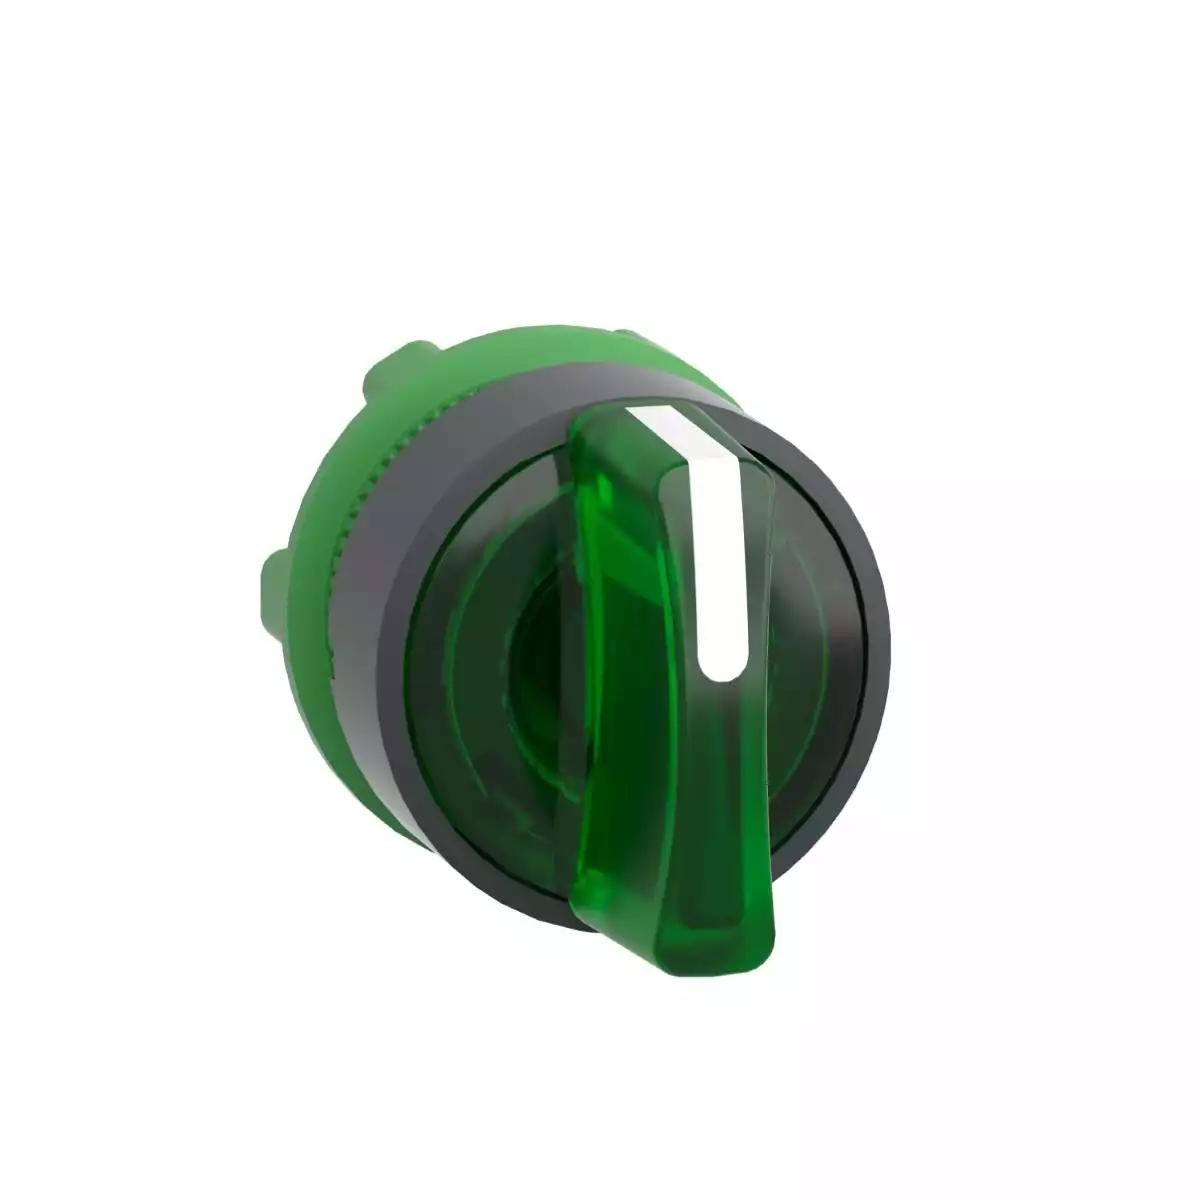 Head for illuminated selector switch, Harmony XB5, grey plastic, green handle, 22mm, universal LED, 3 positions, stay put